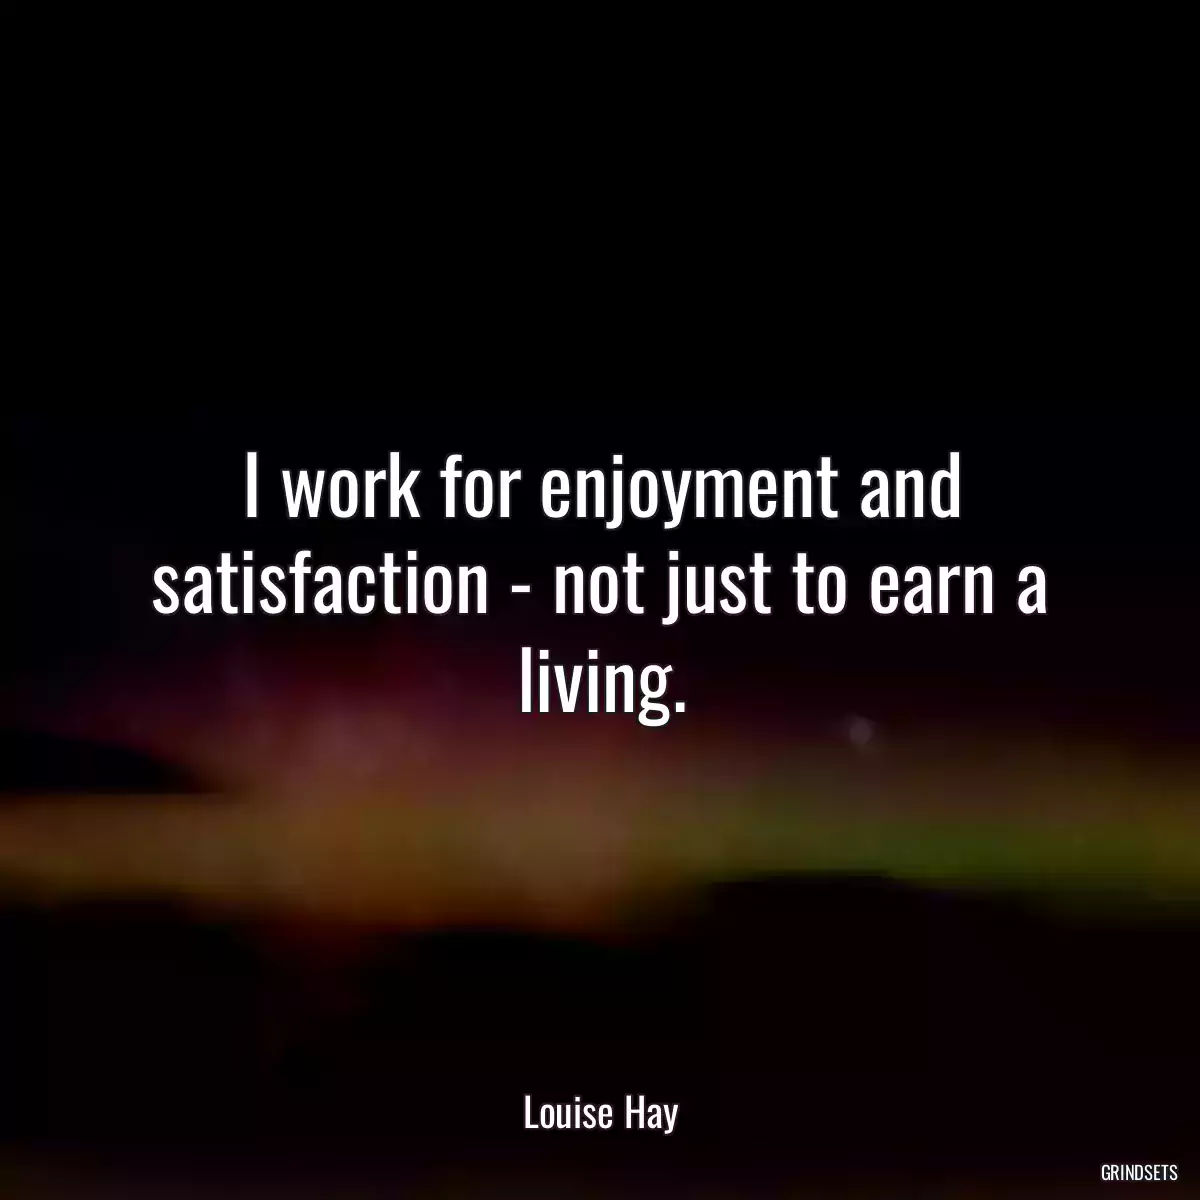 I work for enjoyment and satisfaction - not just to earn a living.